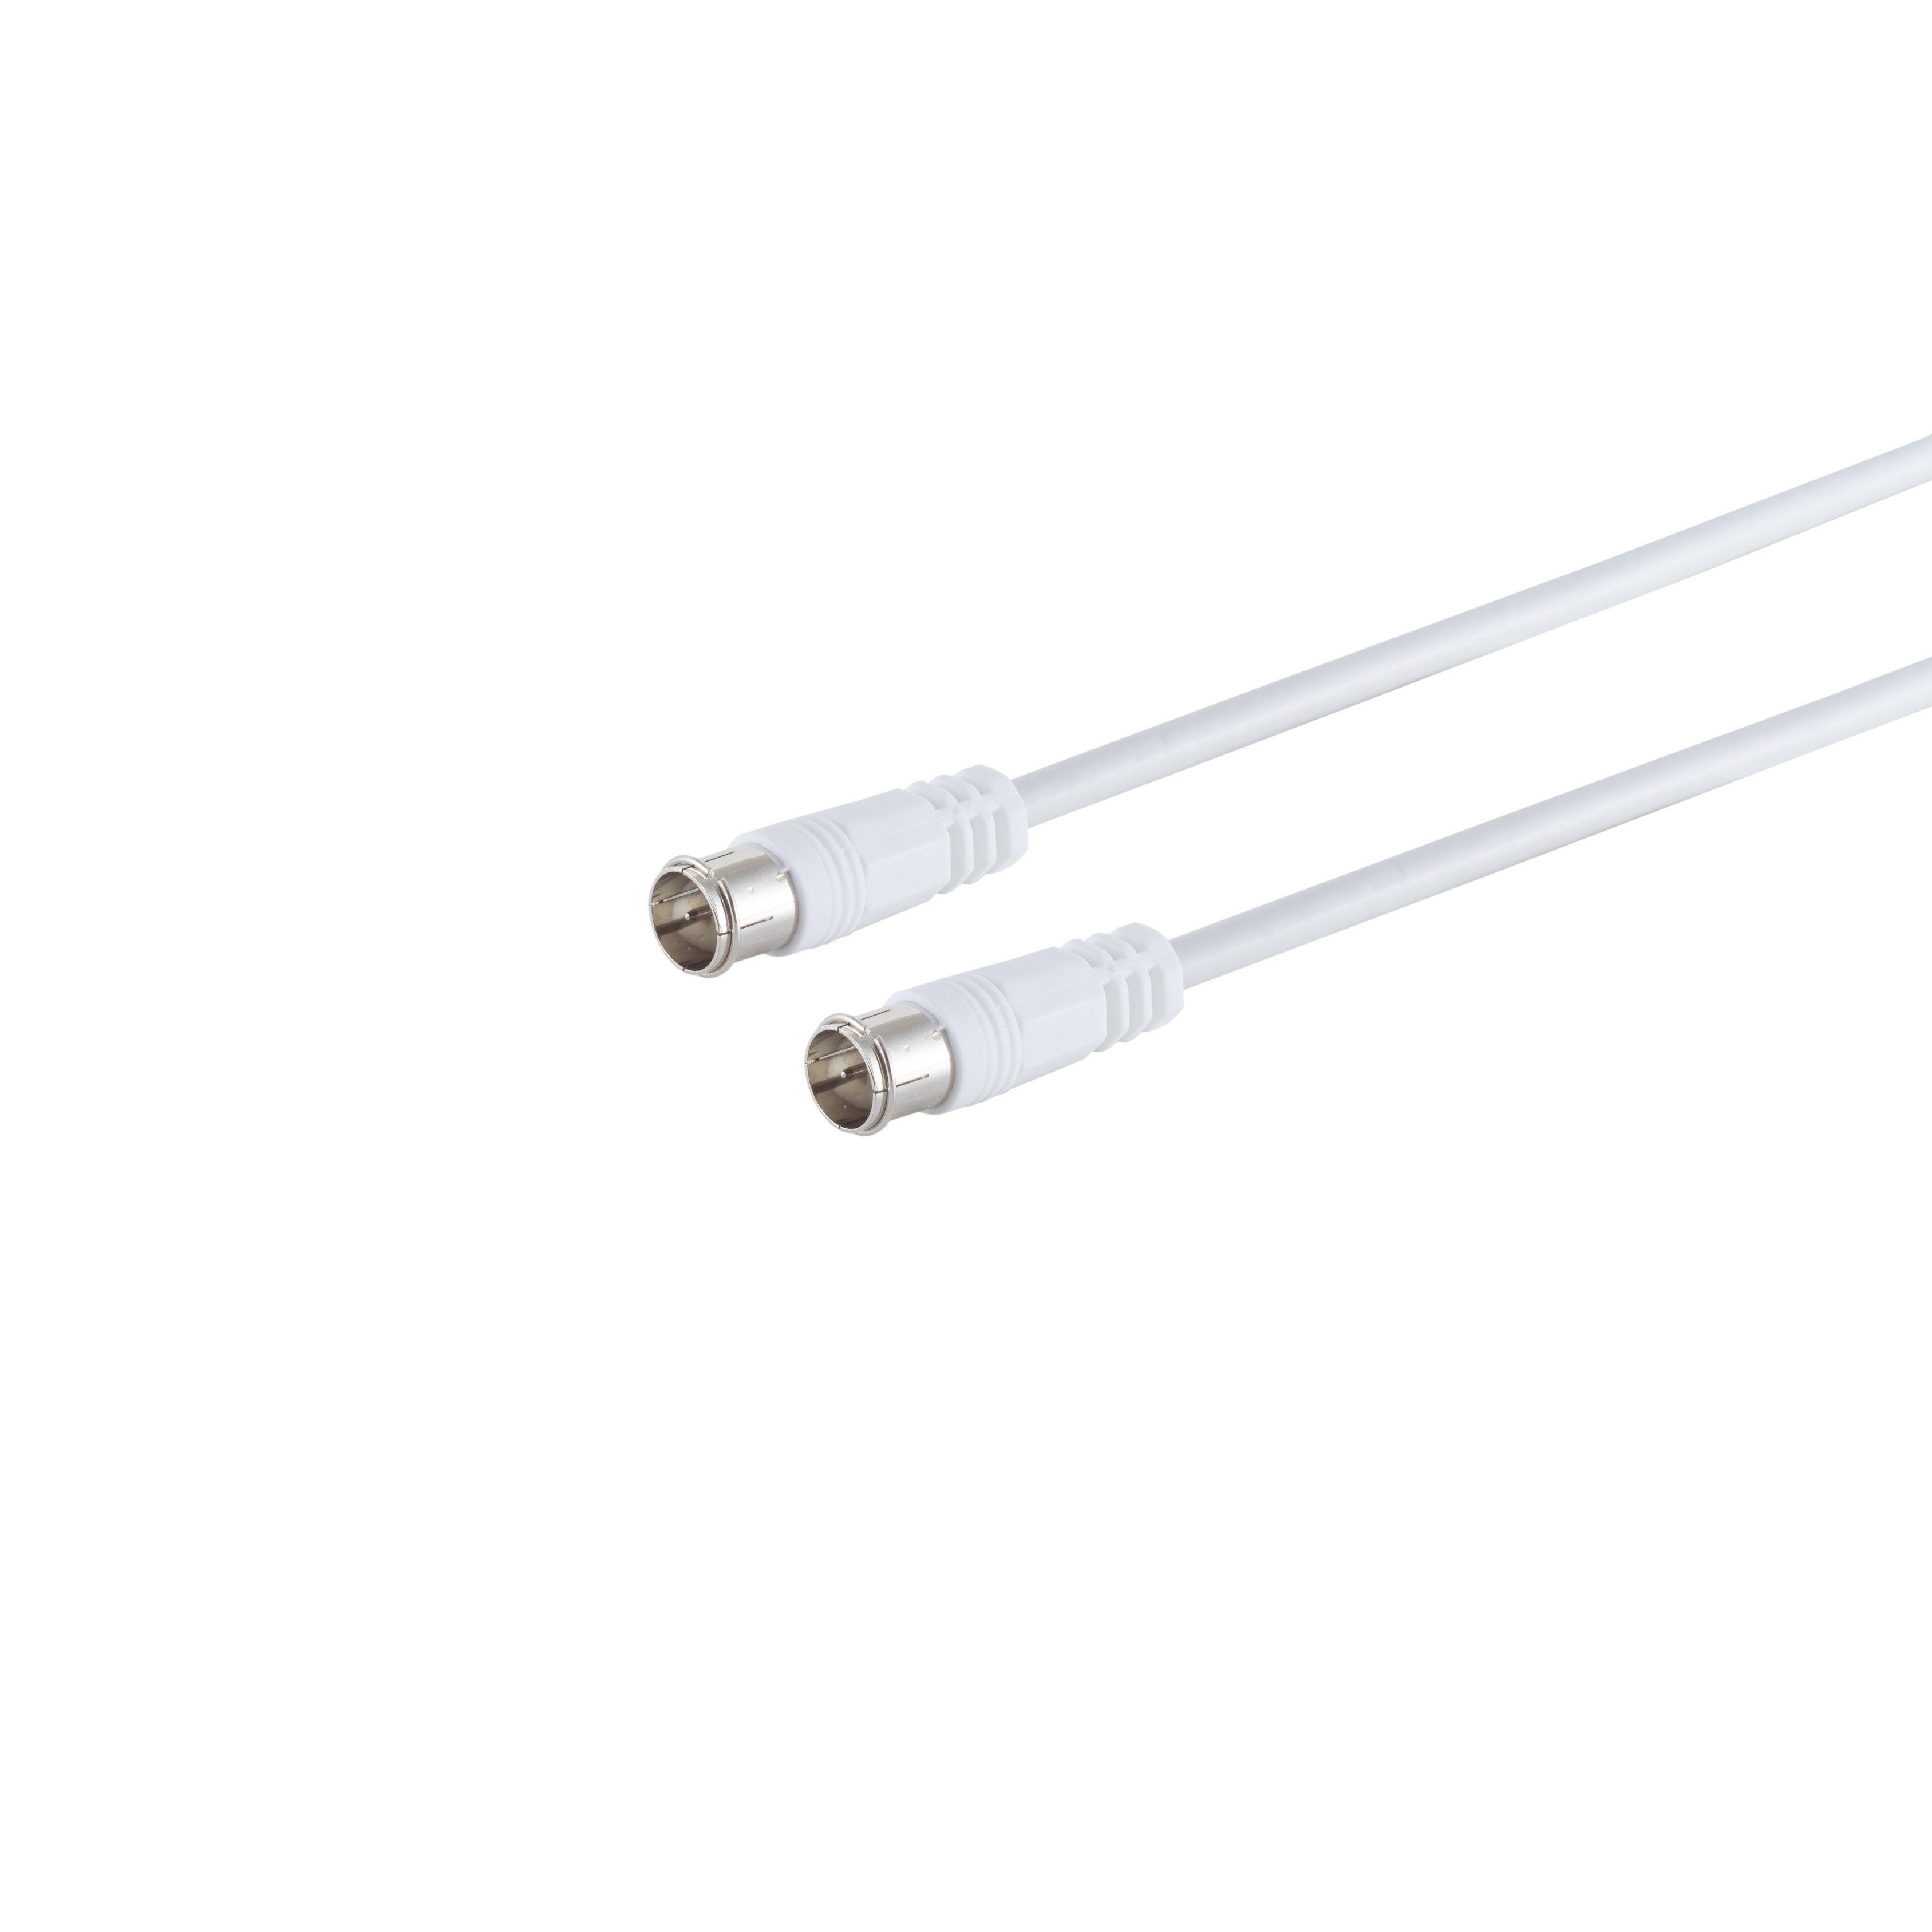 S-Conn F-Quick - weiß Pin, SAT-Kabel, 1,5m F-Quick, dB, (150,00 Central cm) >100